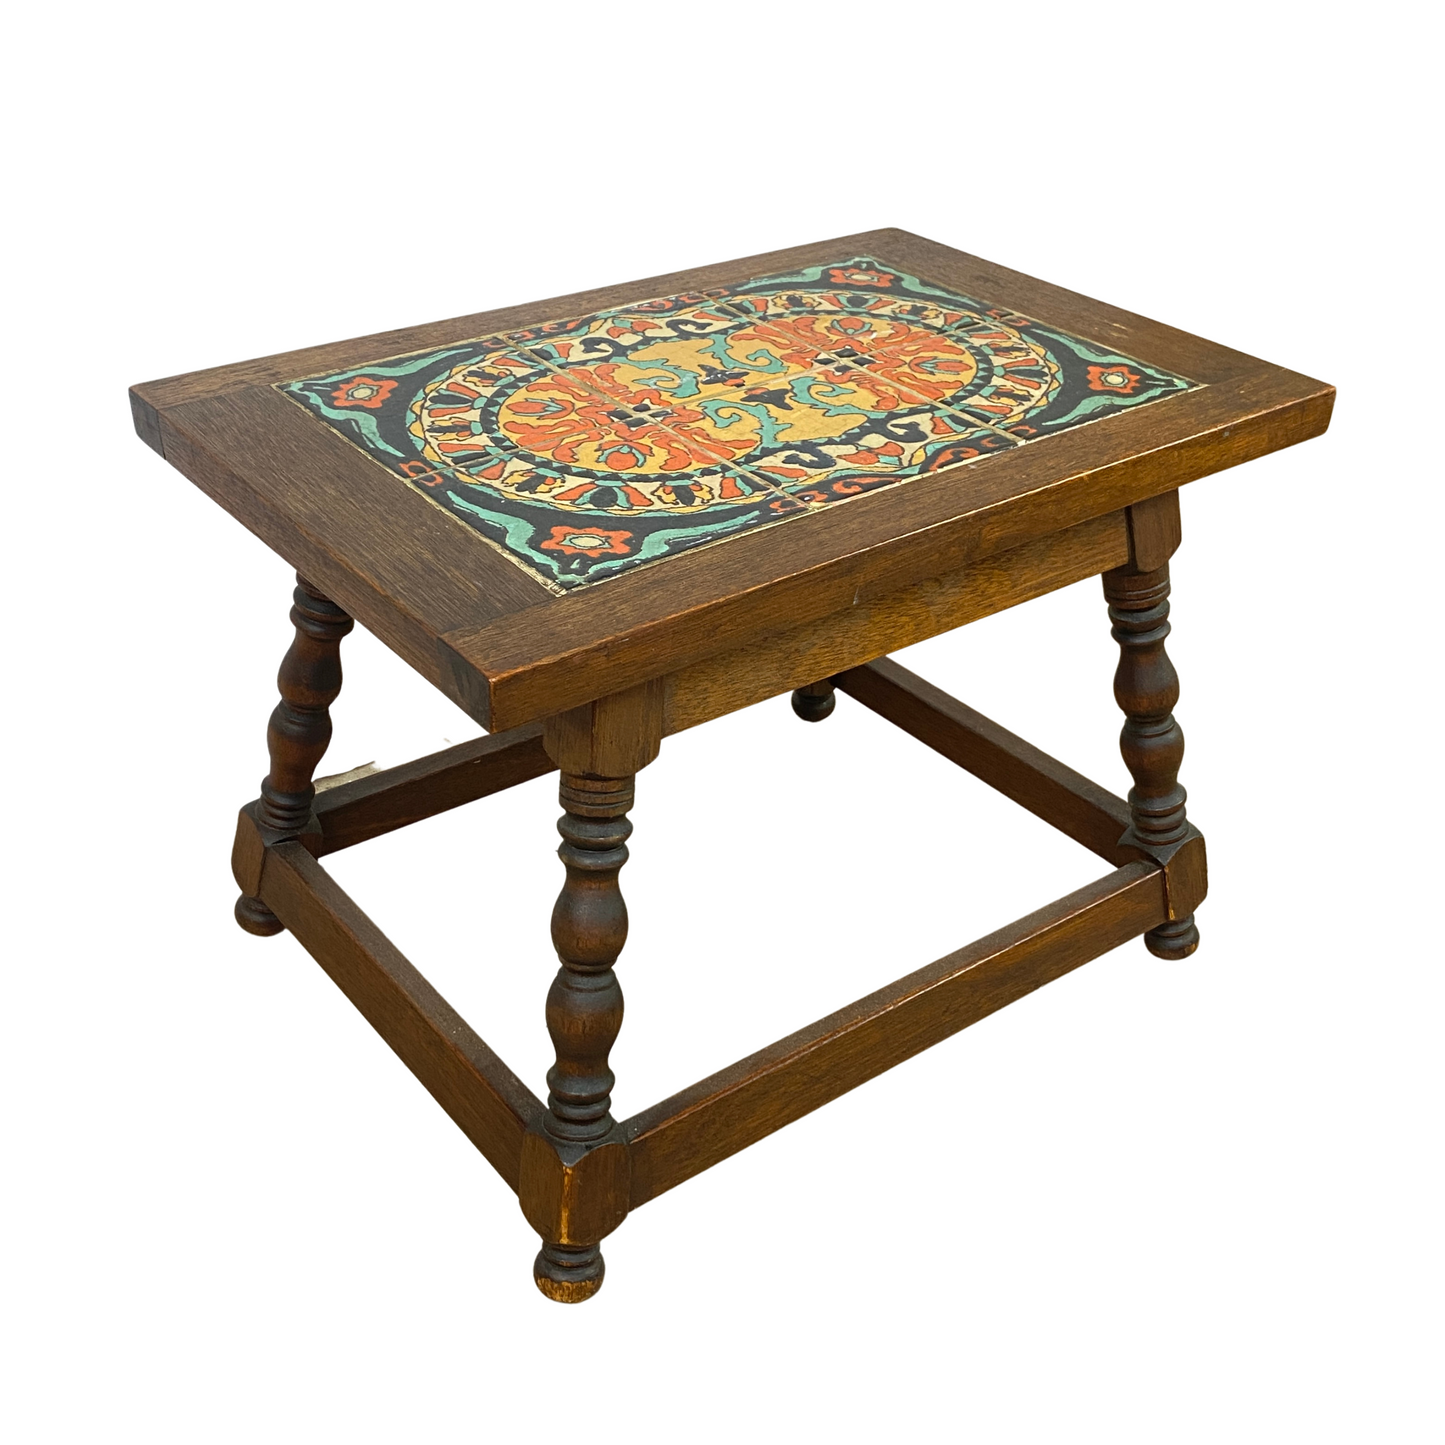 Antique Mission Arts & Crafts California Tile Top Coffee Table